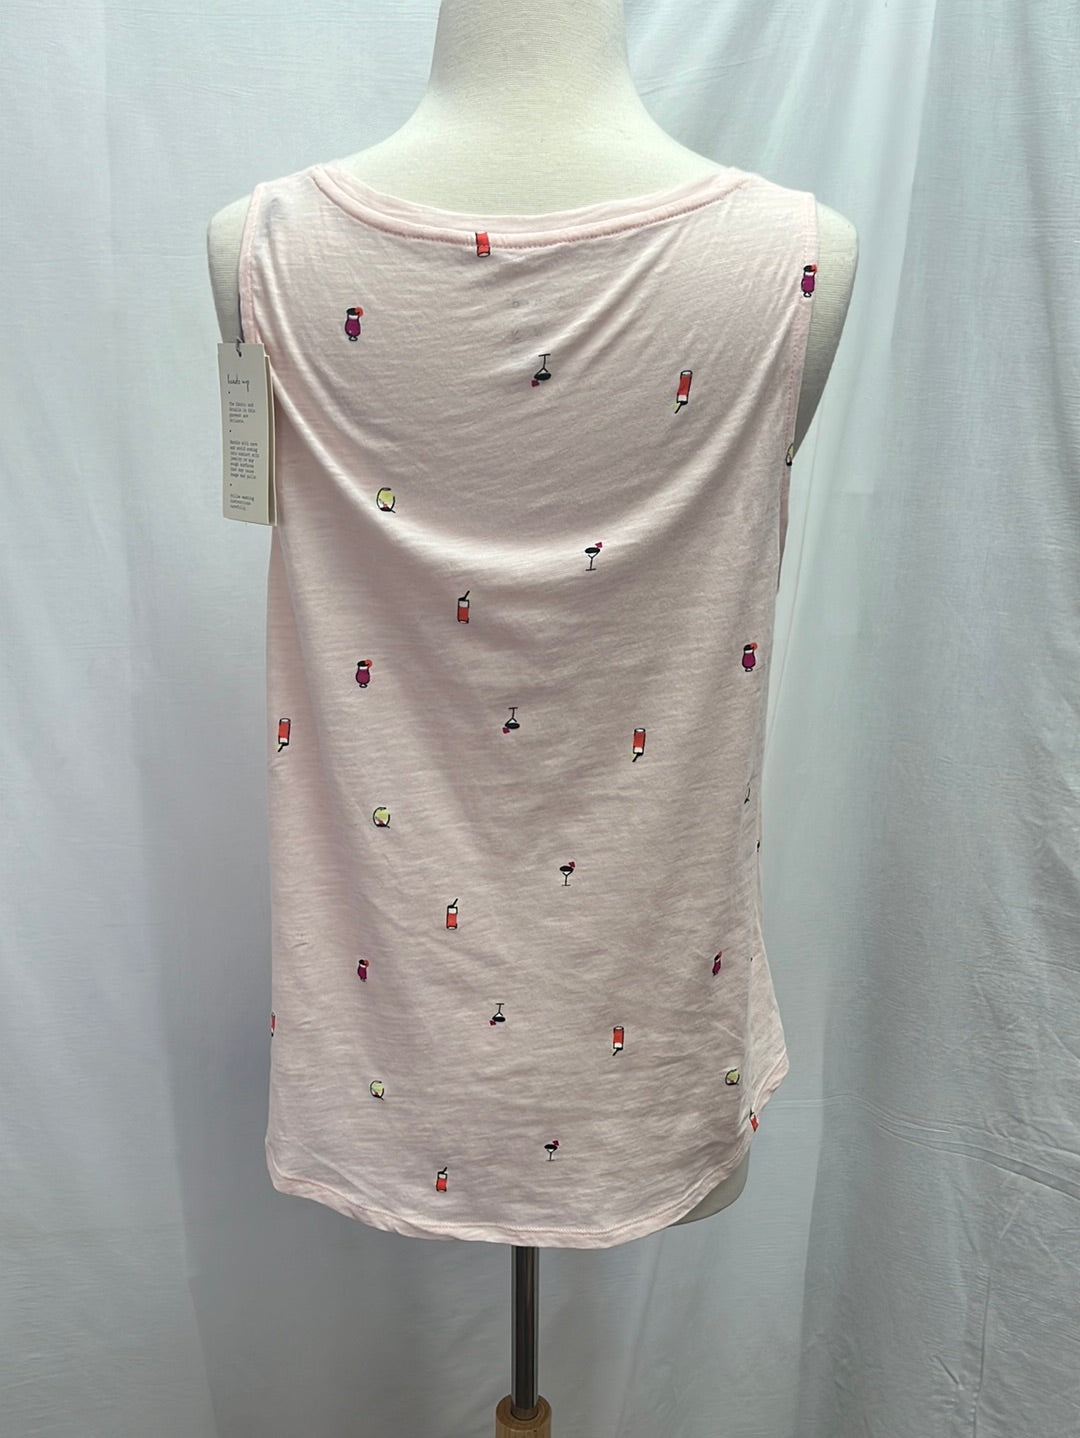 NWT -- A NEW DAY Pink Sequin Cocktail Print Flared Mini Tank Top -- L